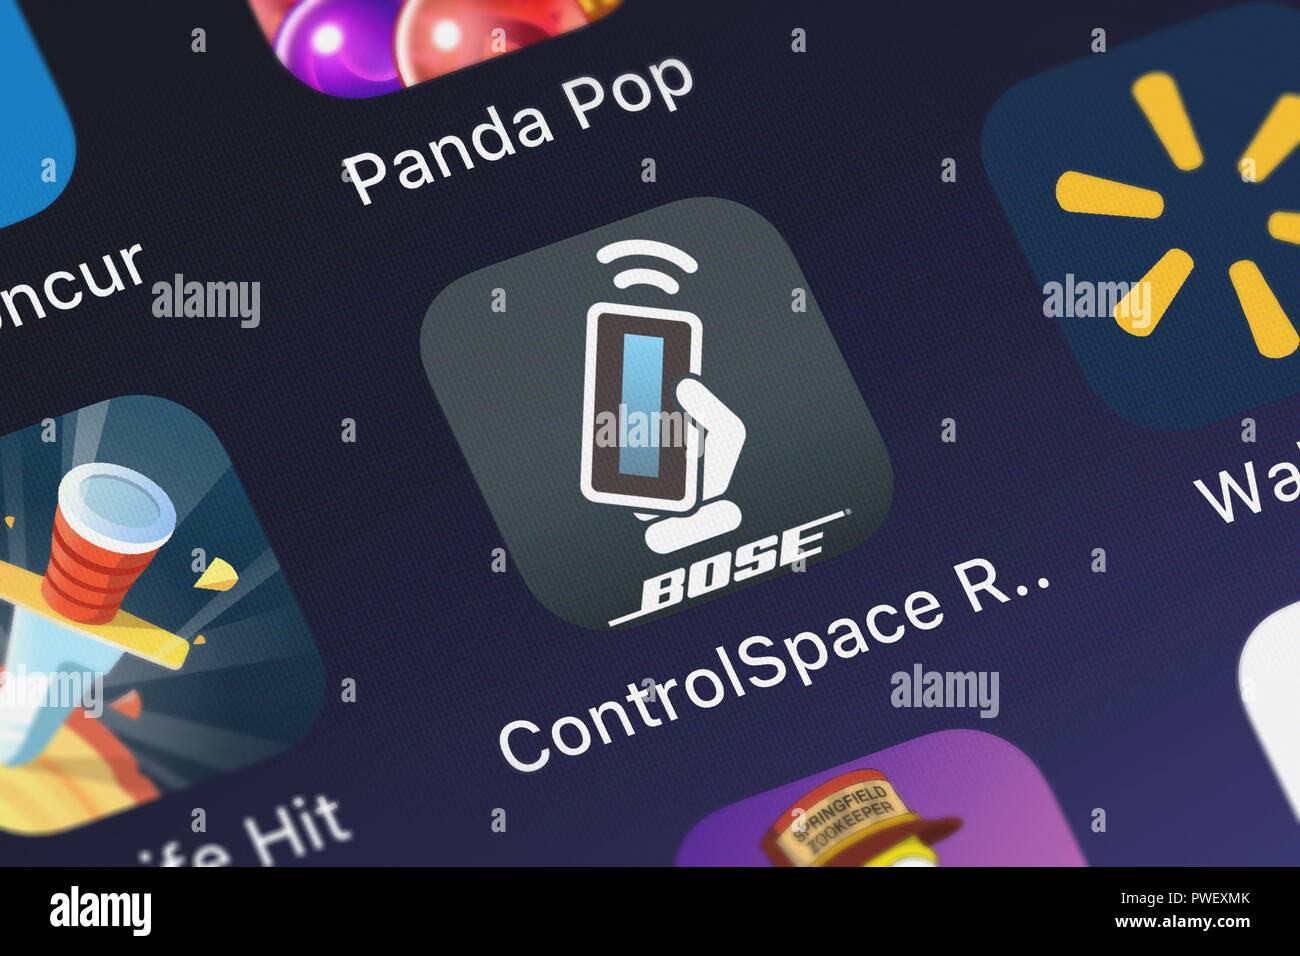 London, United Kingdom - October 15, 2018: Close-up of the ControlSpace Remote icon from Bose Corporation on an iPhone. Stock Photo